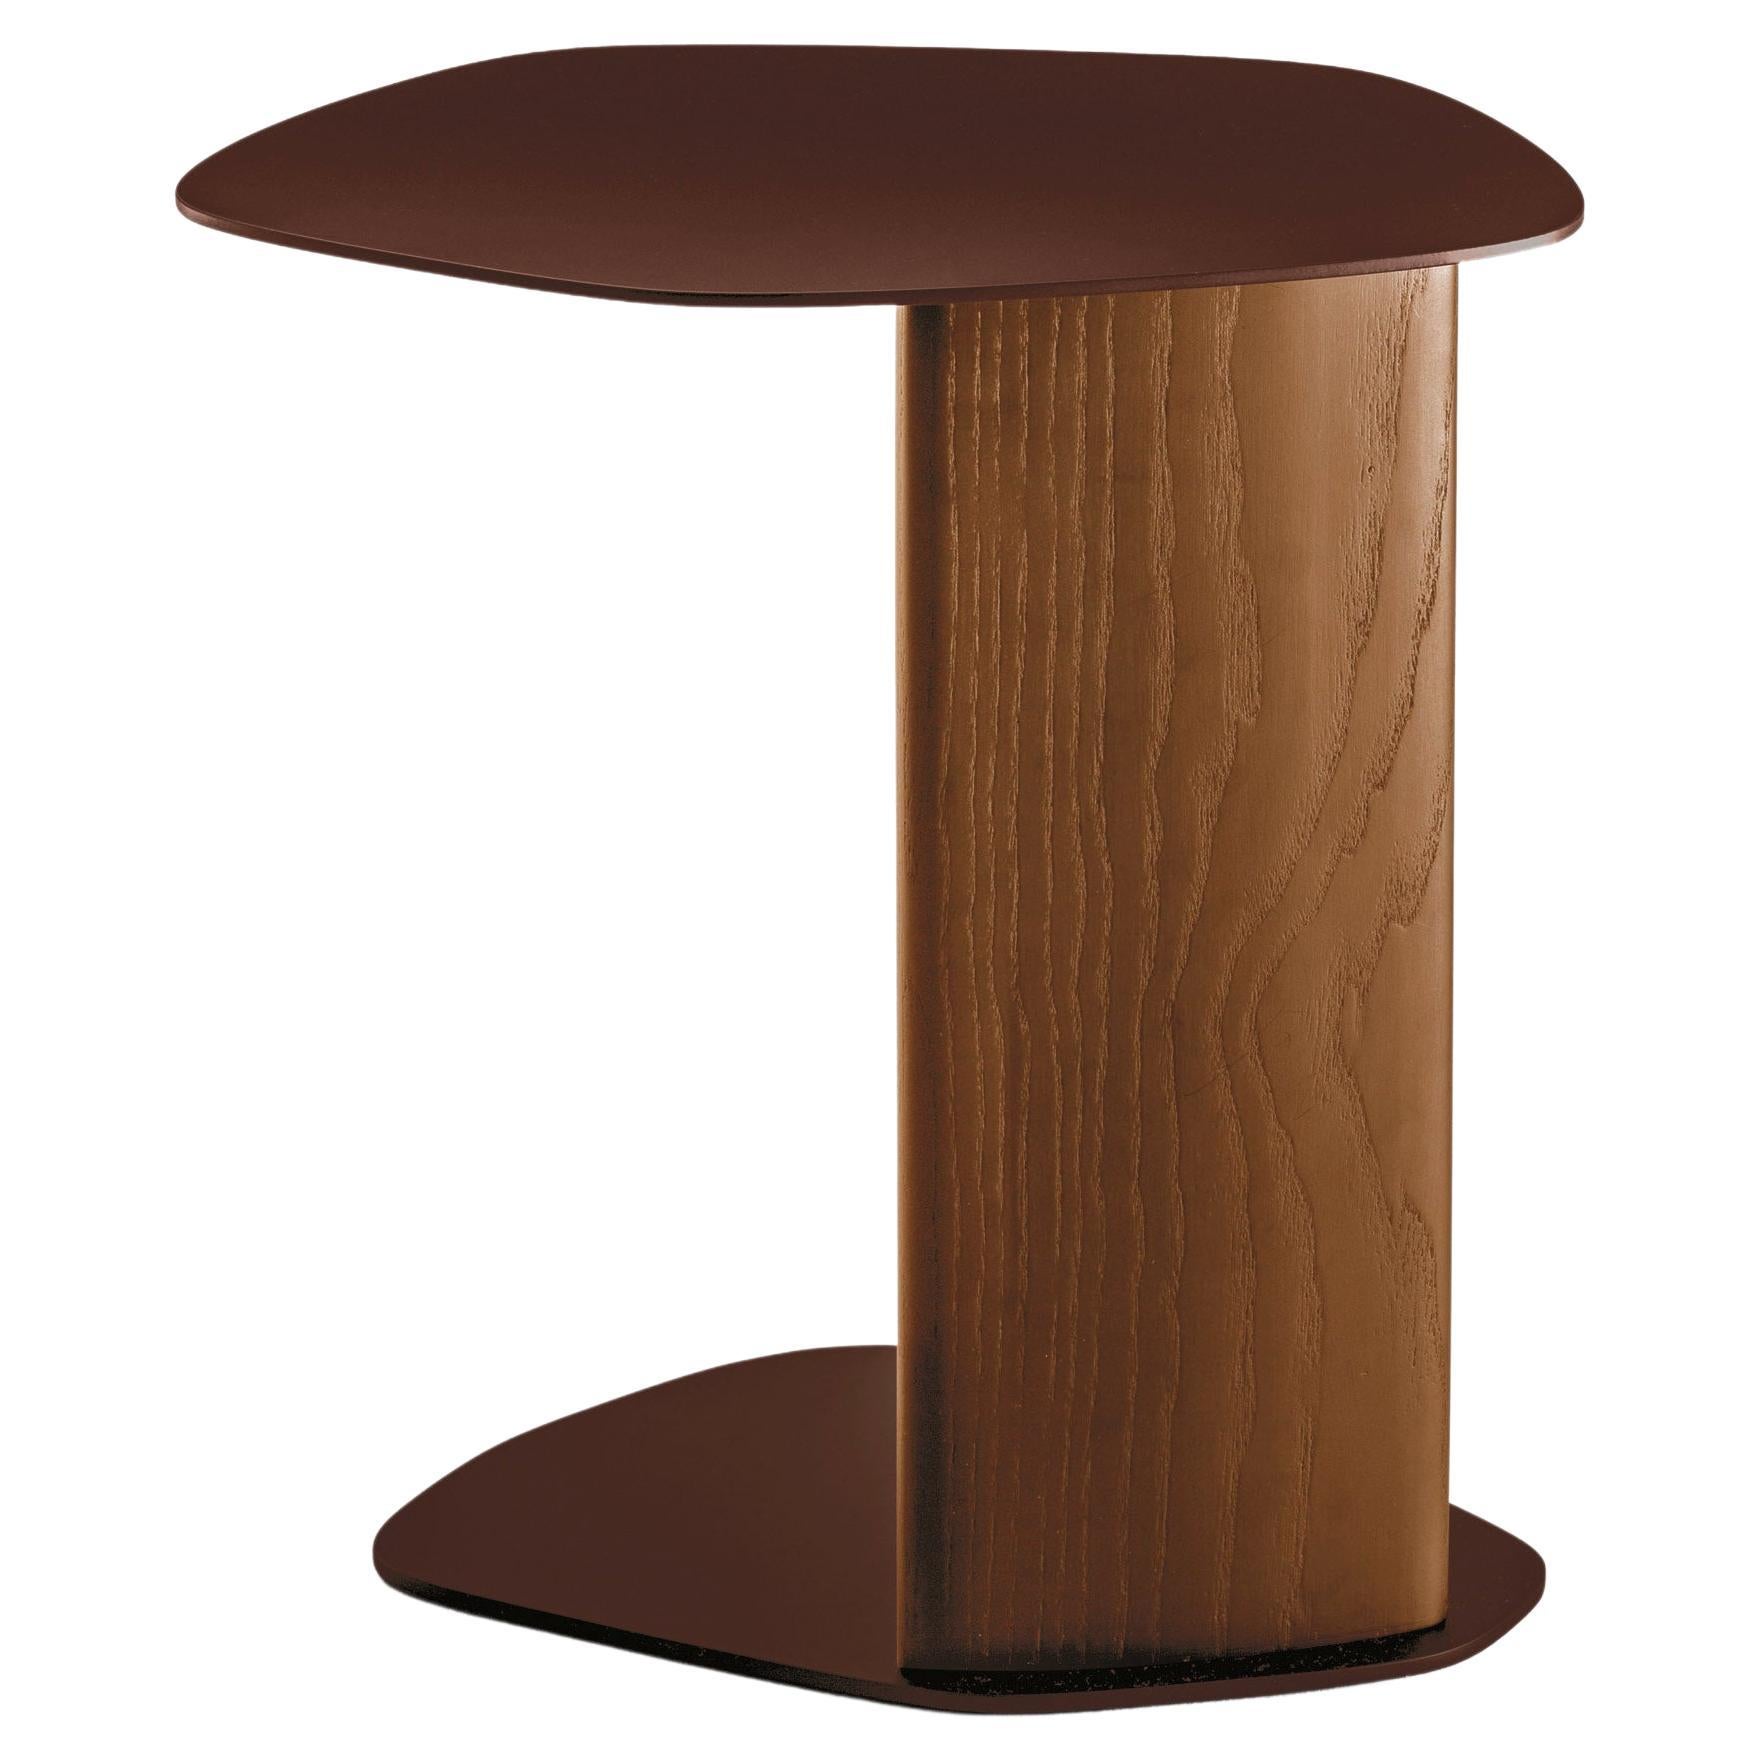 Keisho Coffee Table in Plum Top with Walnut Stained Ssh Base by Andrea Steidl